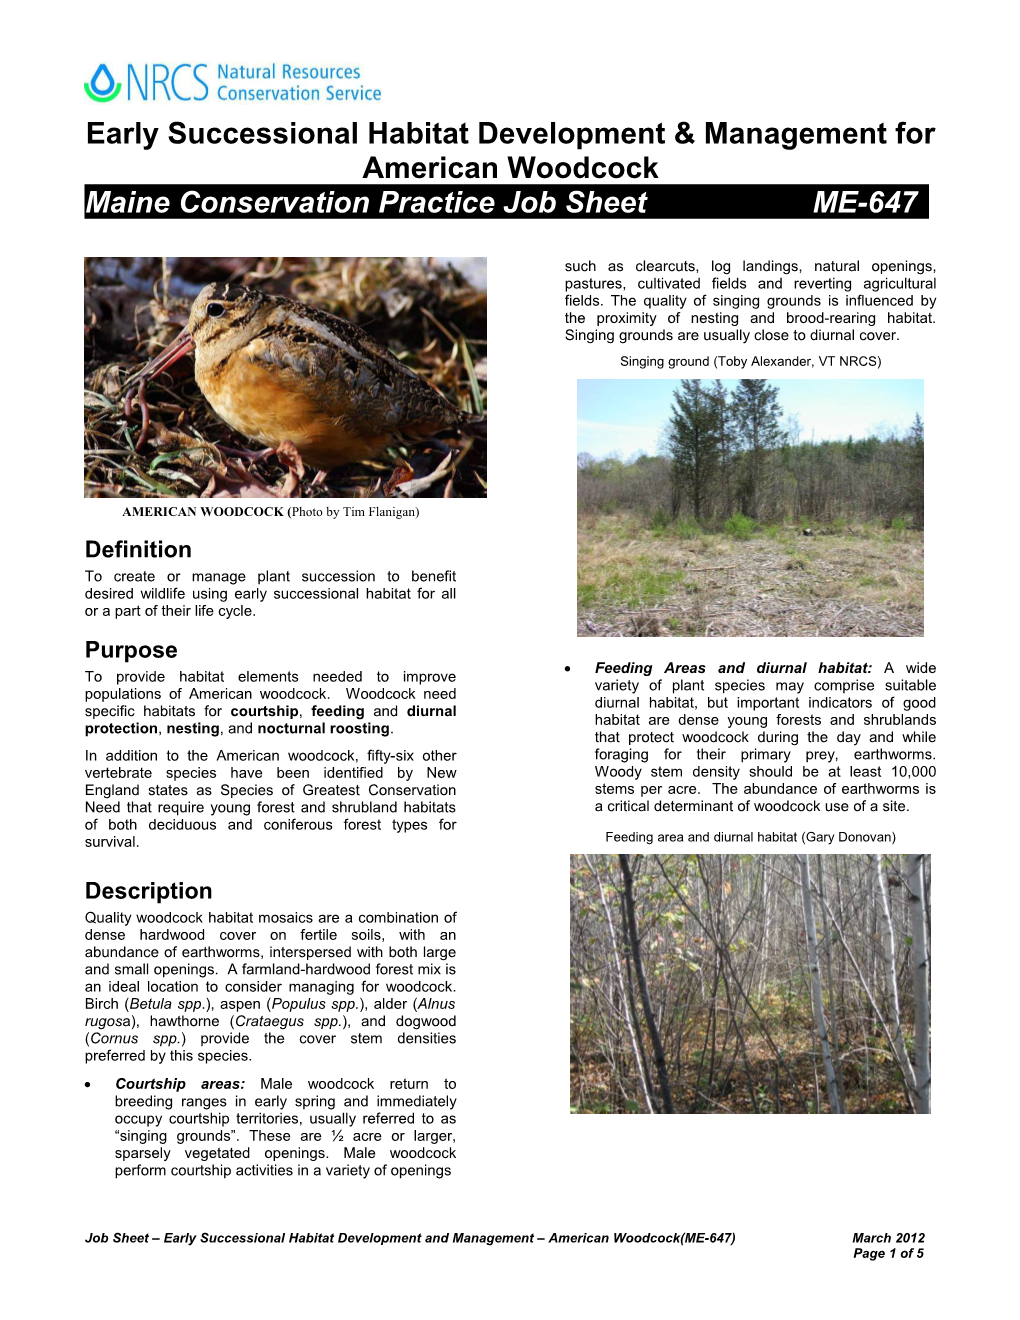 Early Successional Habitat Development & Management for American Woodcock